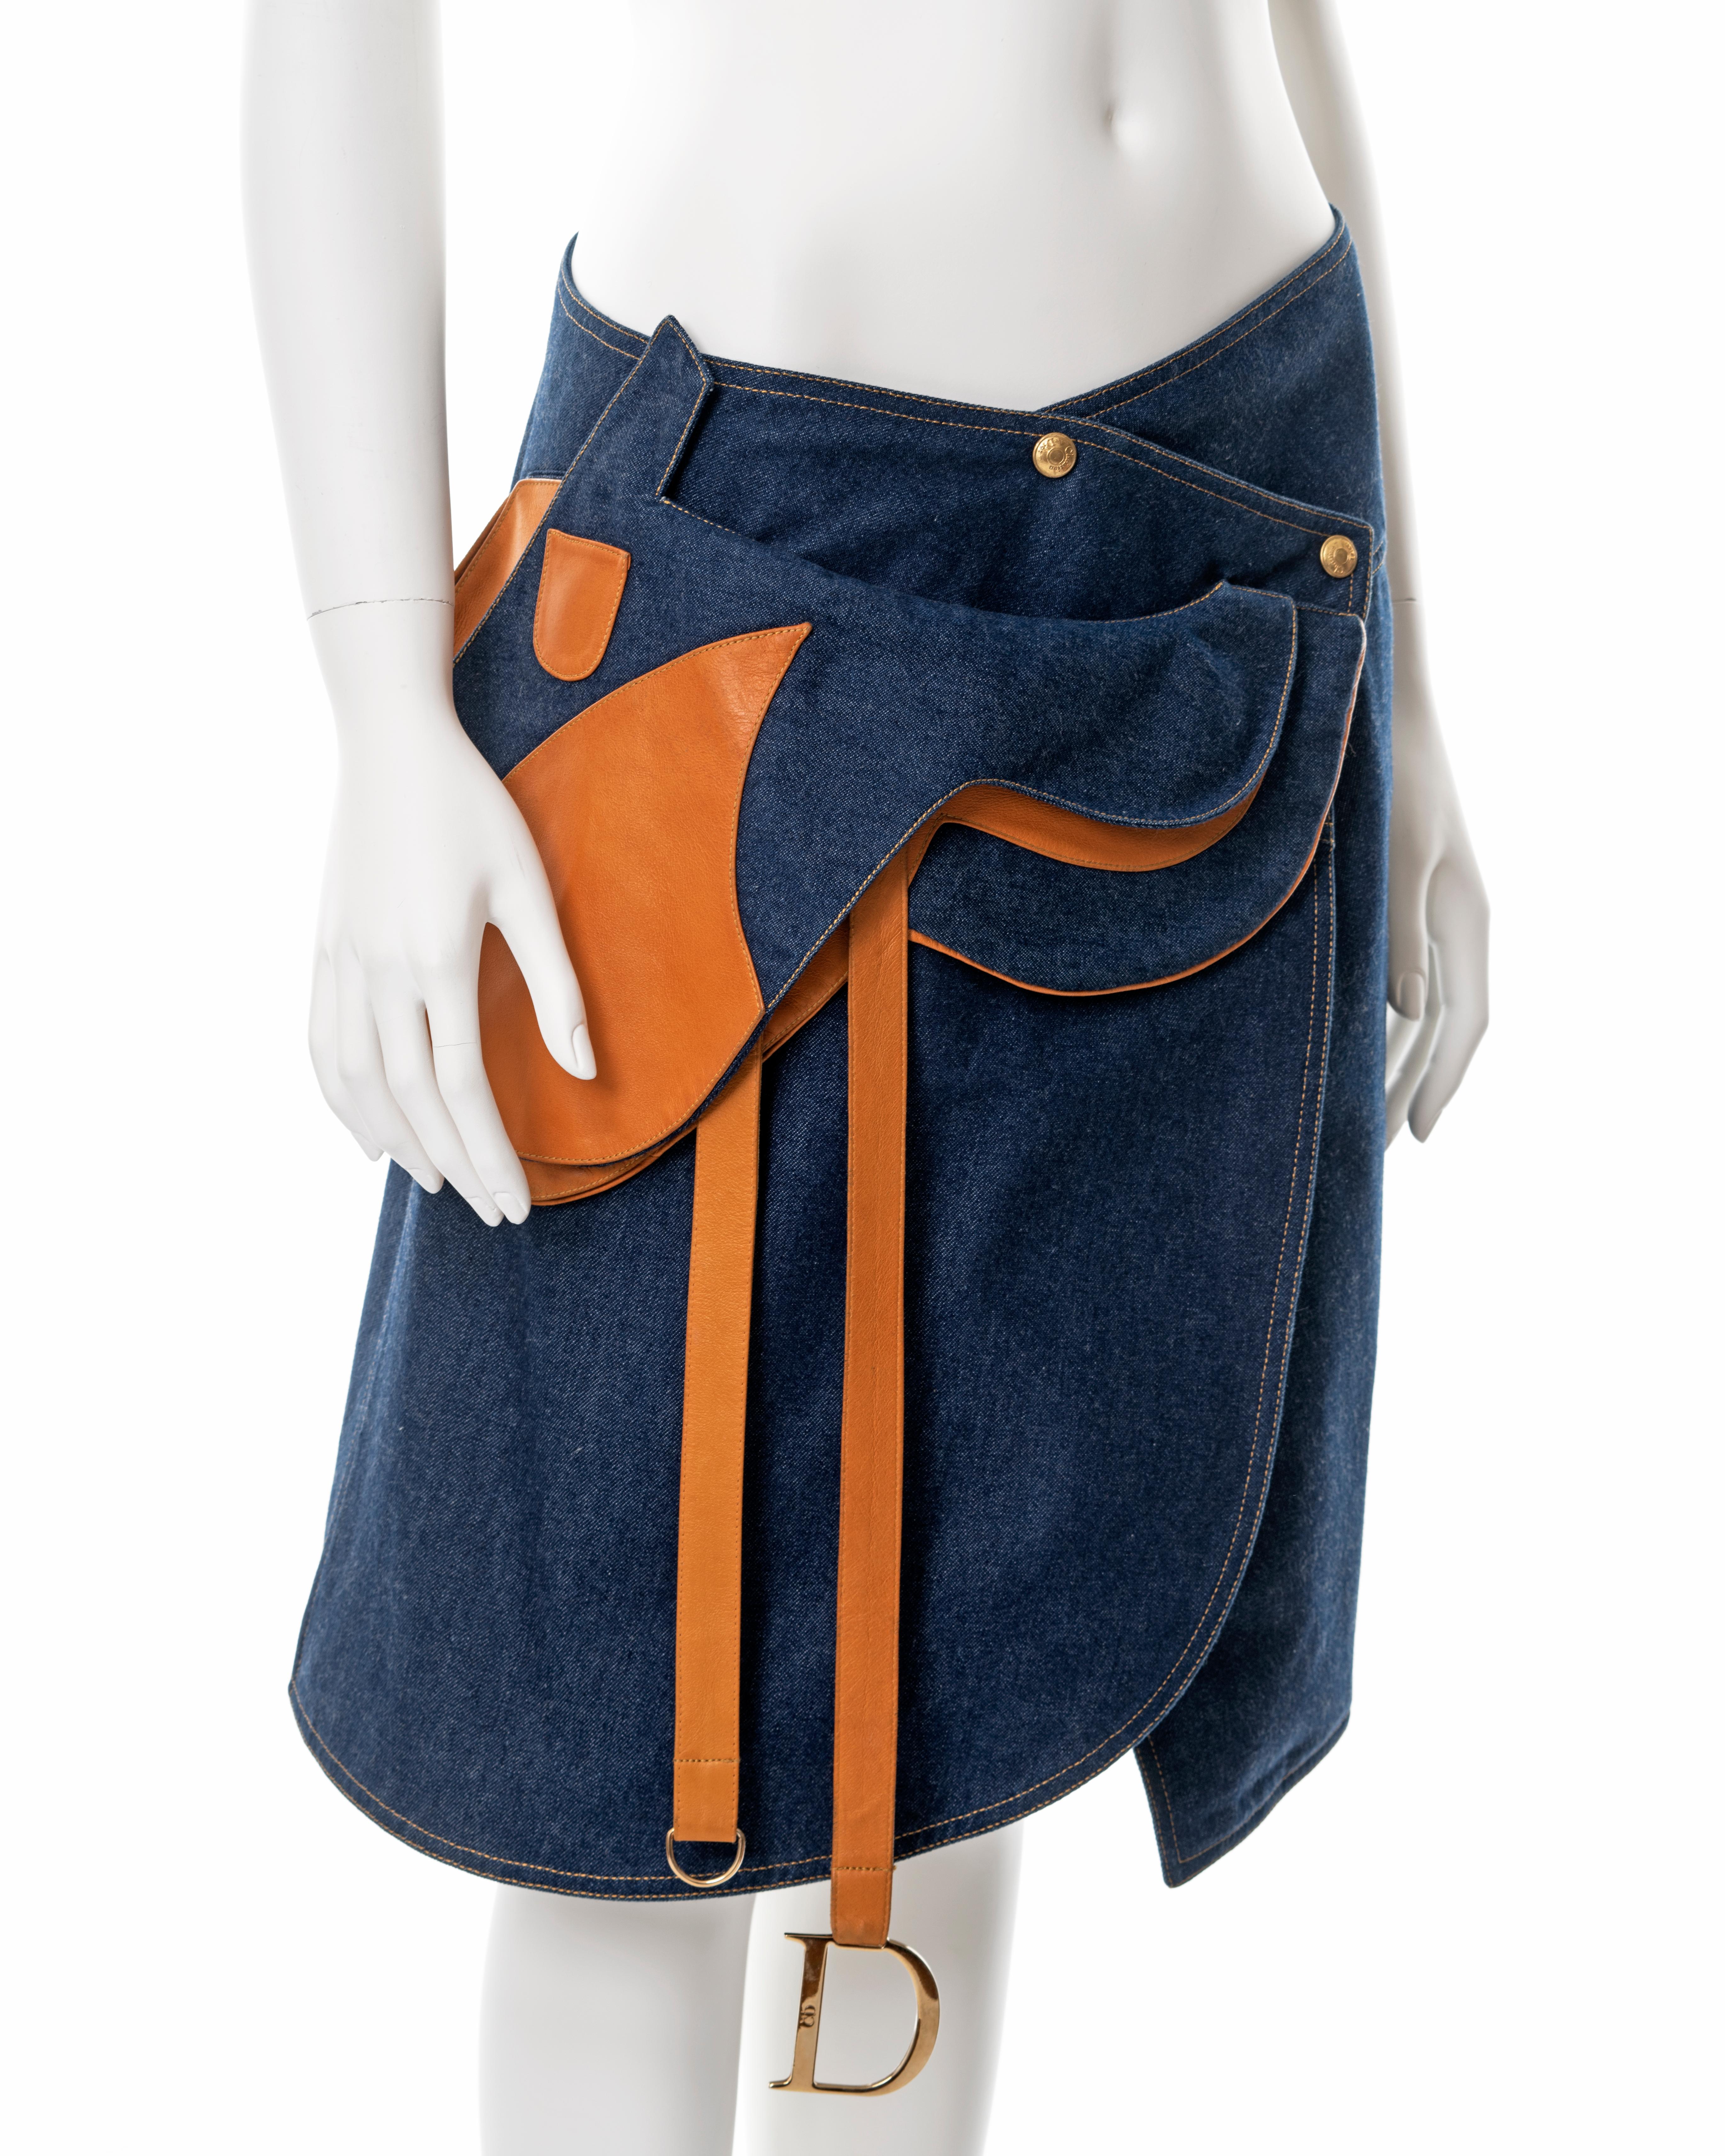 Christian Dior by John Galliano indigo denim and leather saddle skirt, ss 2000 For Sale 3